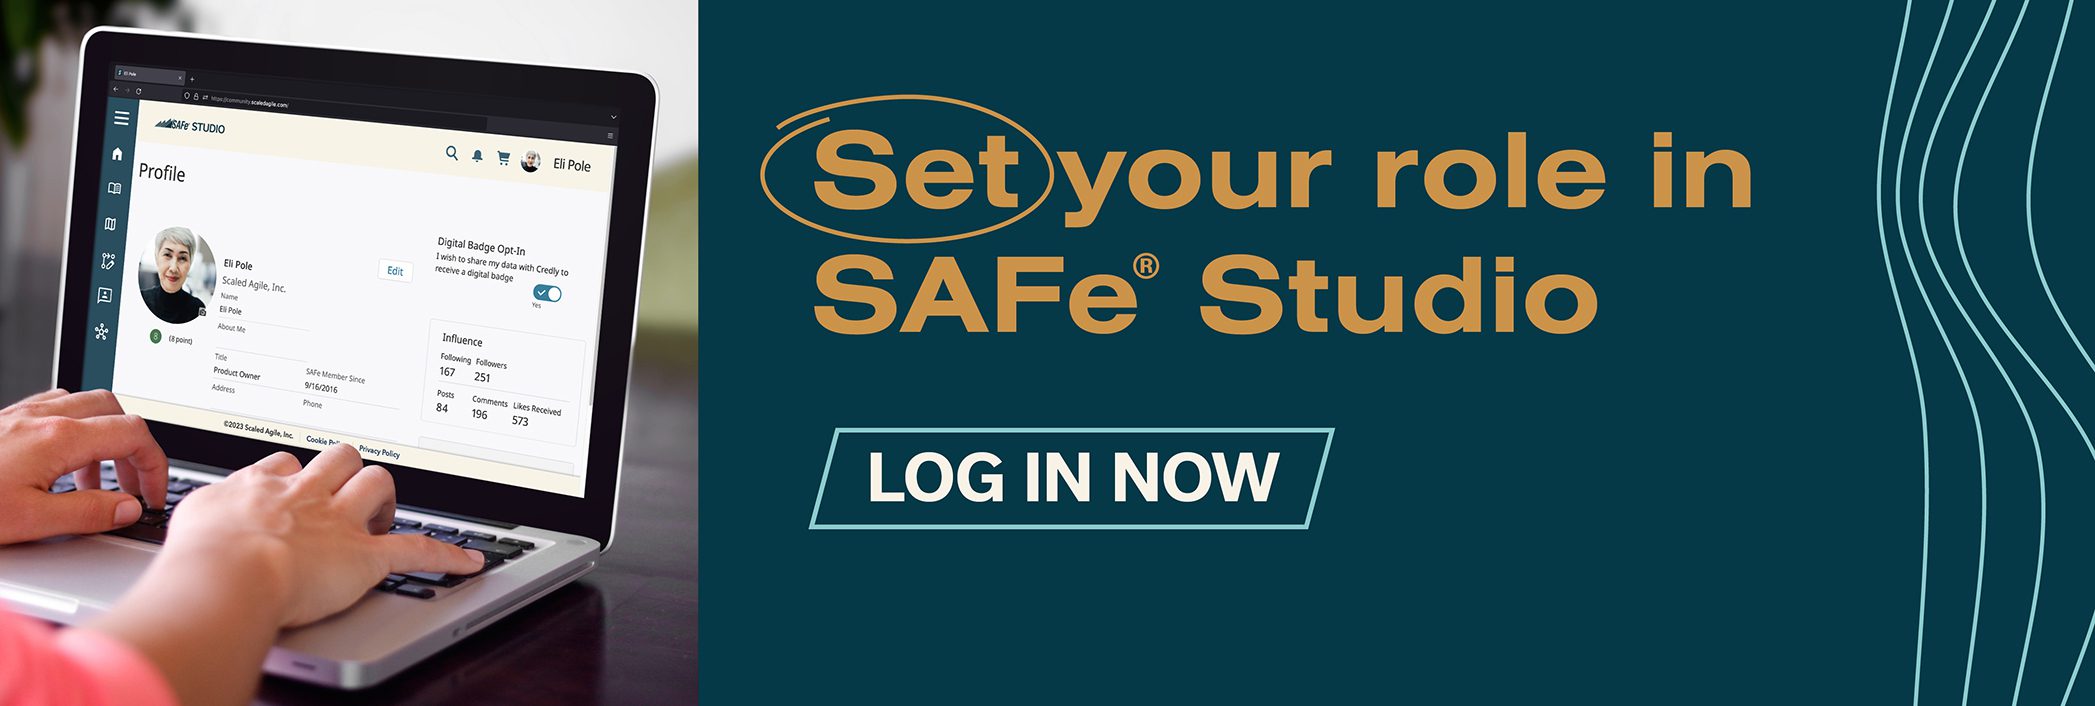 Set your role in SAFe Studio
Log in now